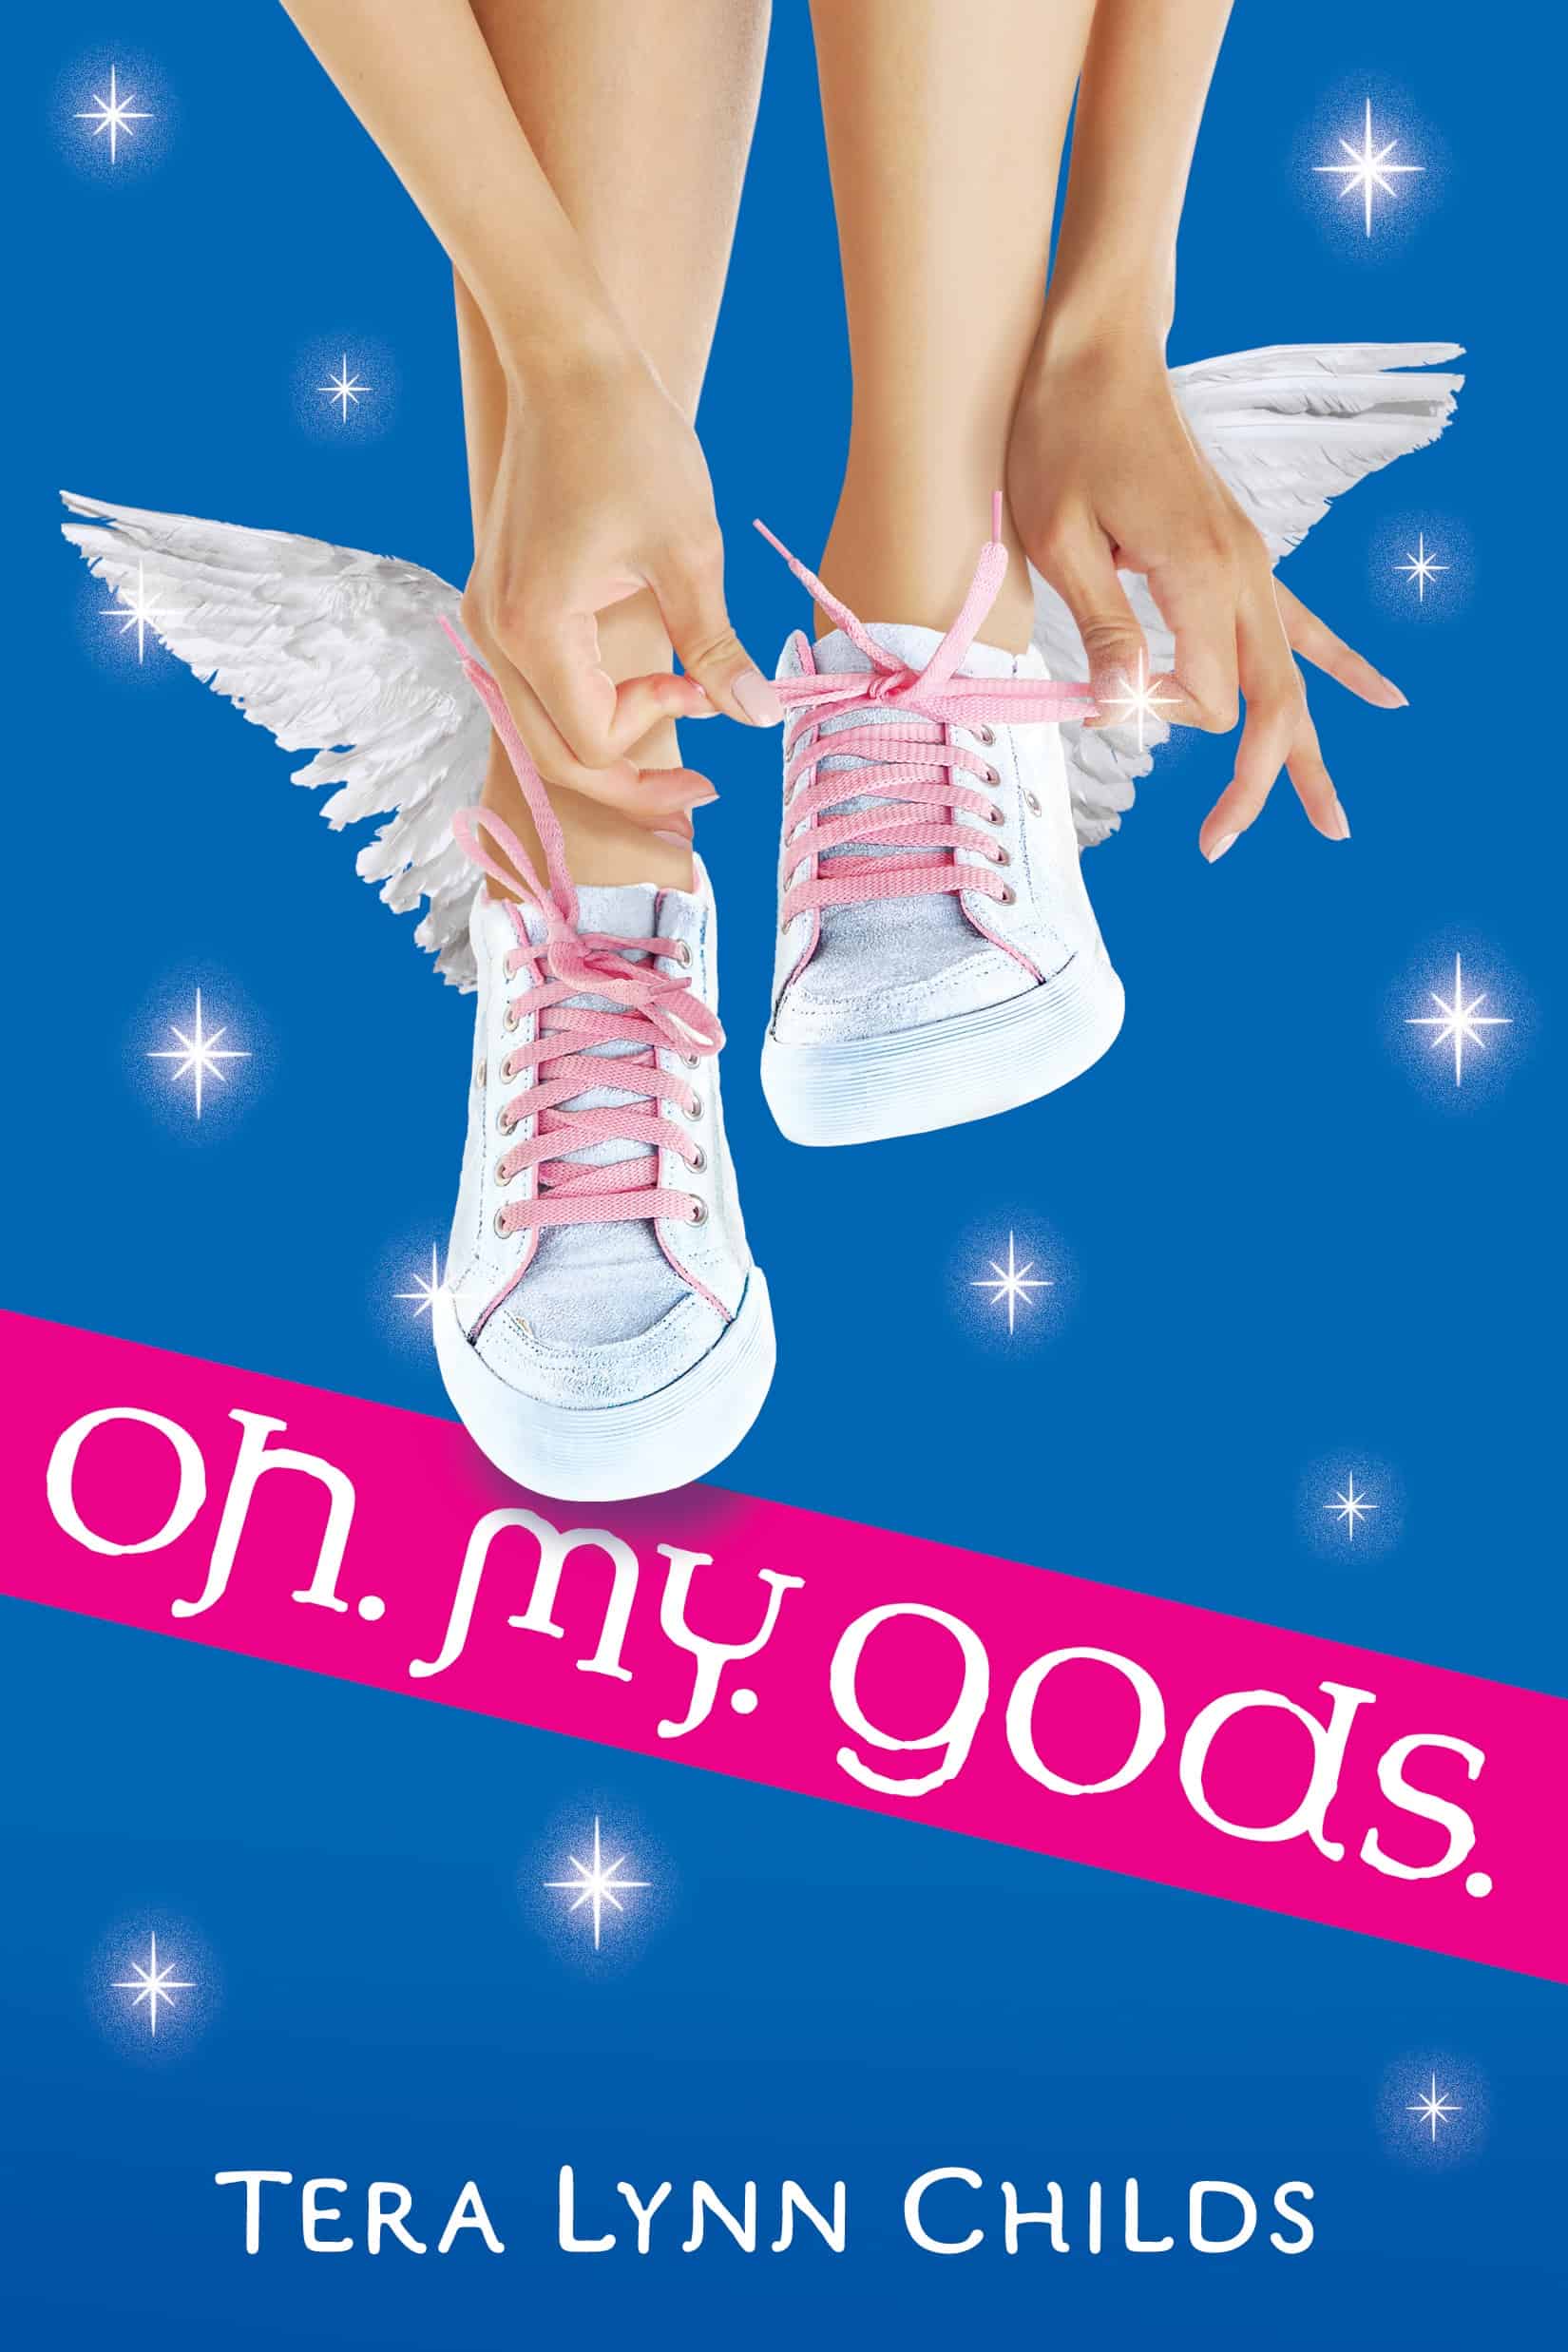 Oh. My. Gods. by Tera Lynn Childs, the first book in the Oh. My. Gods. series. teralynnchilds.com/books/oh-my-gods